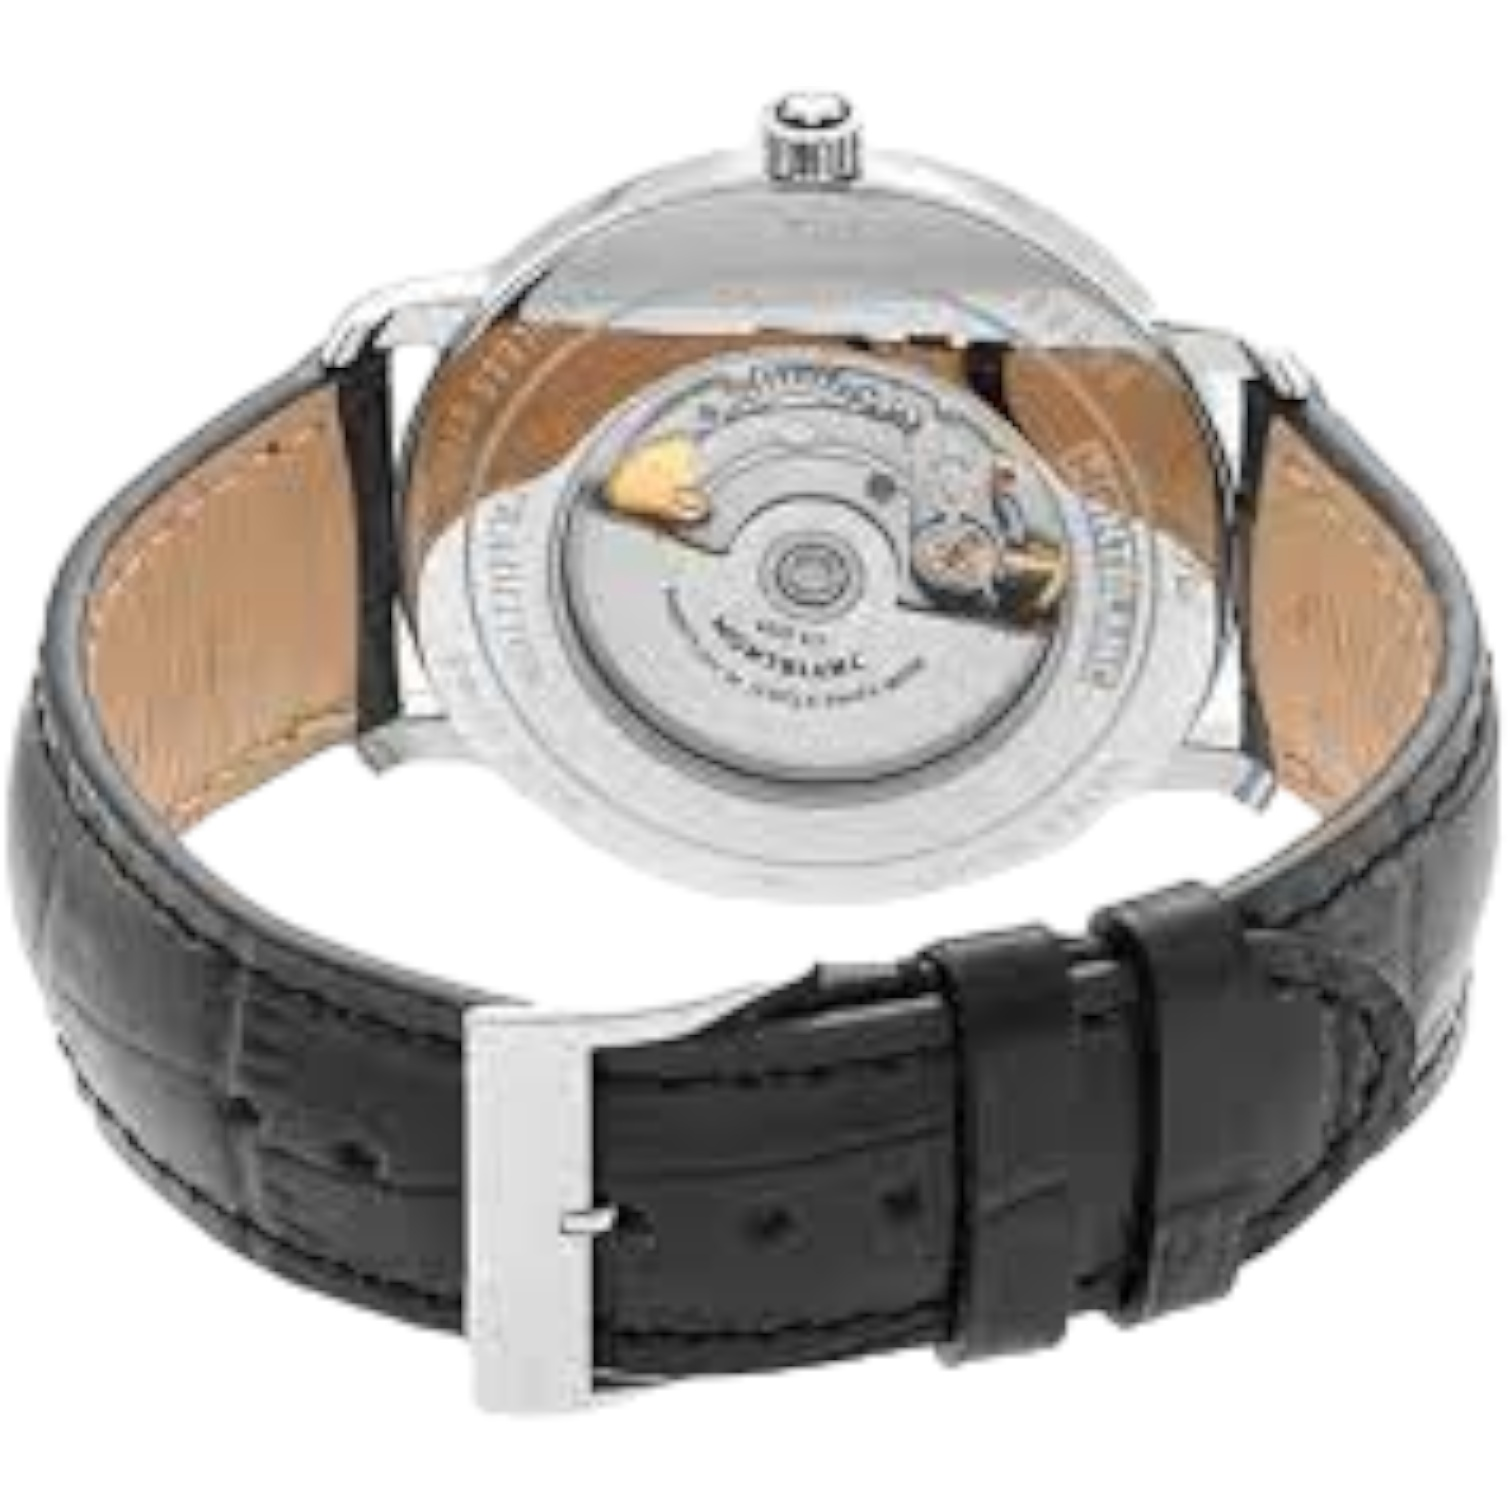 Montblanc Tradition Date Ref. 112611 - ON6226